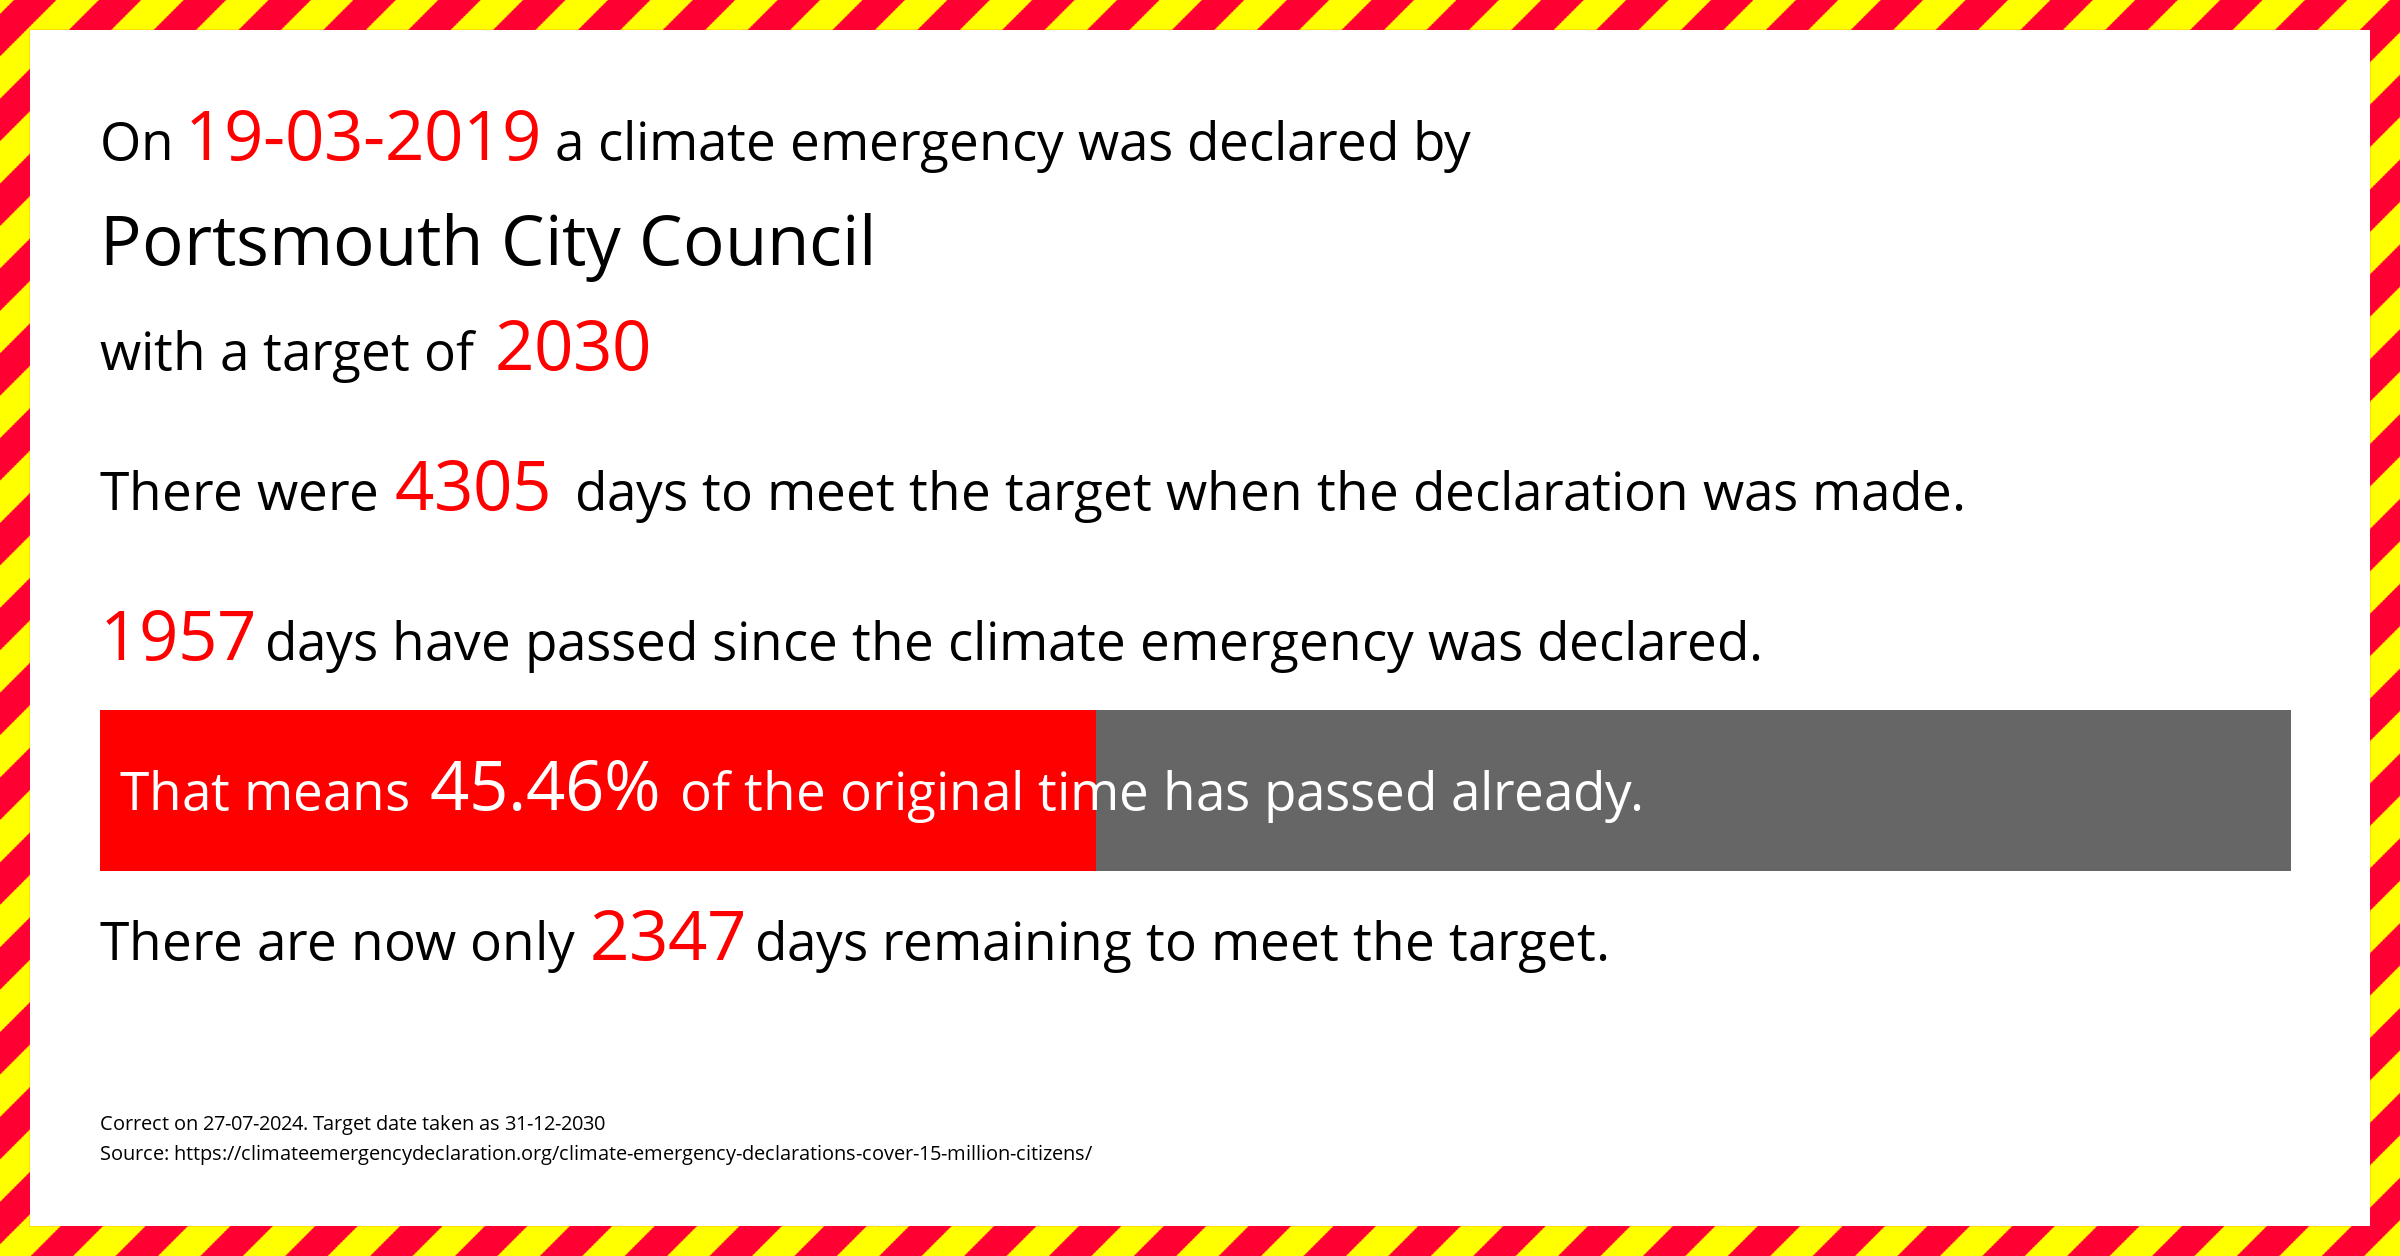 Portsmouth City Council declared a Climate emergency on Tuesday 19th March 2019, with a target of 2030.